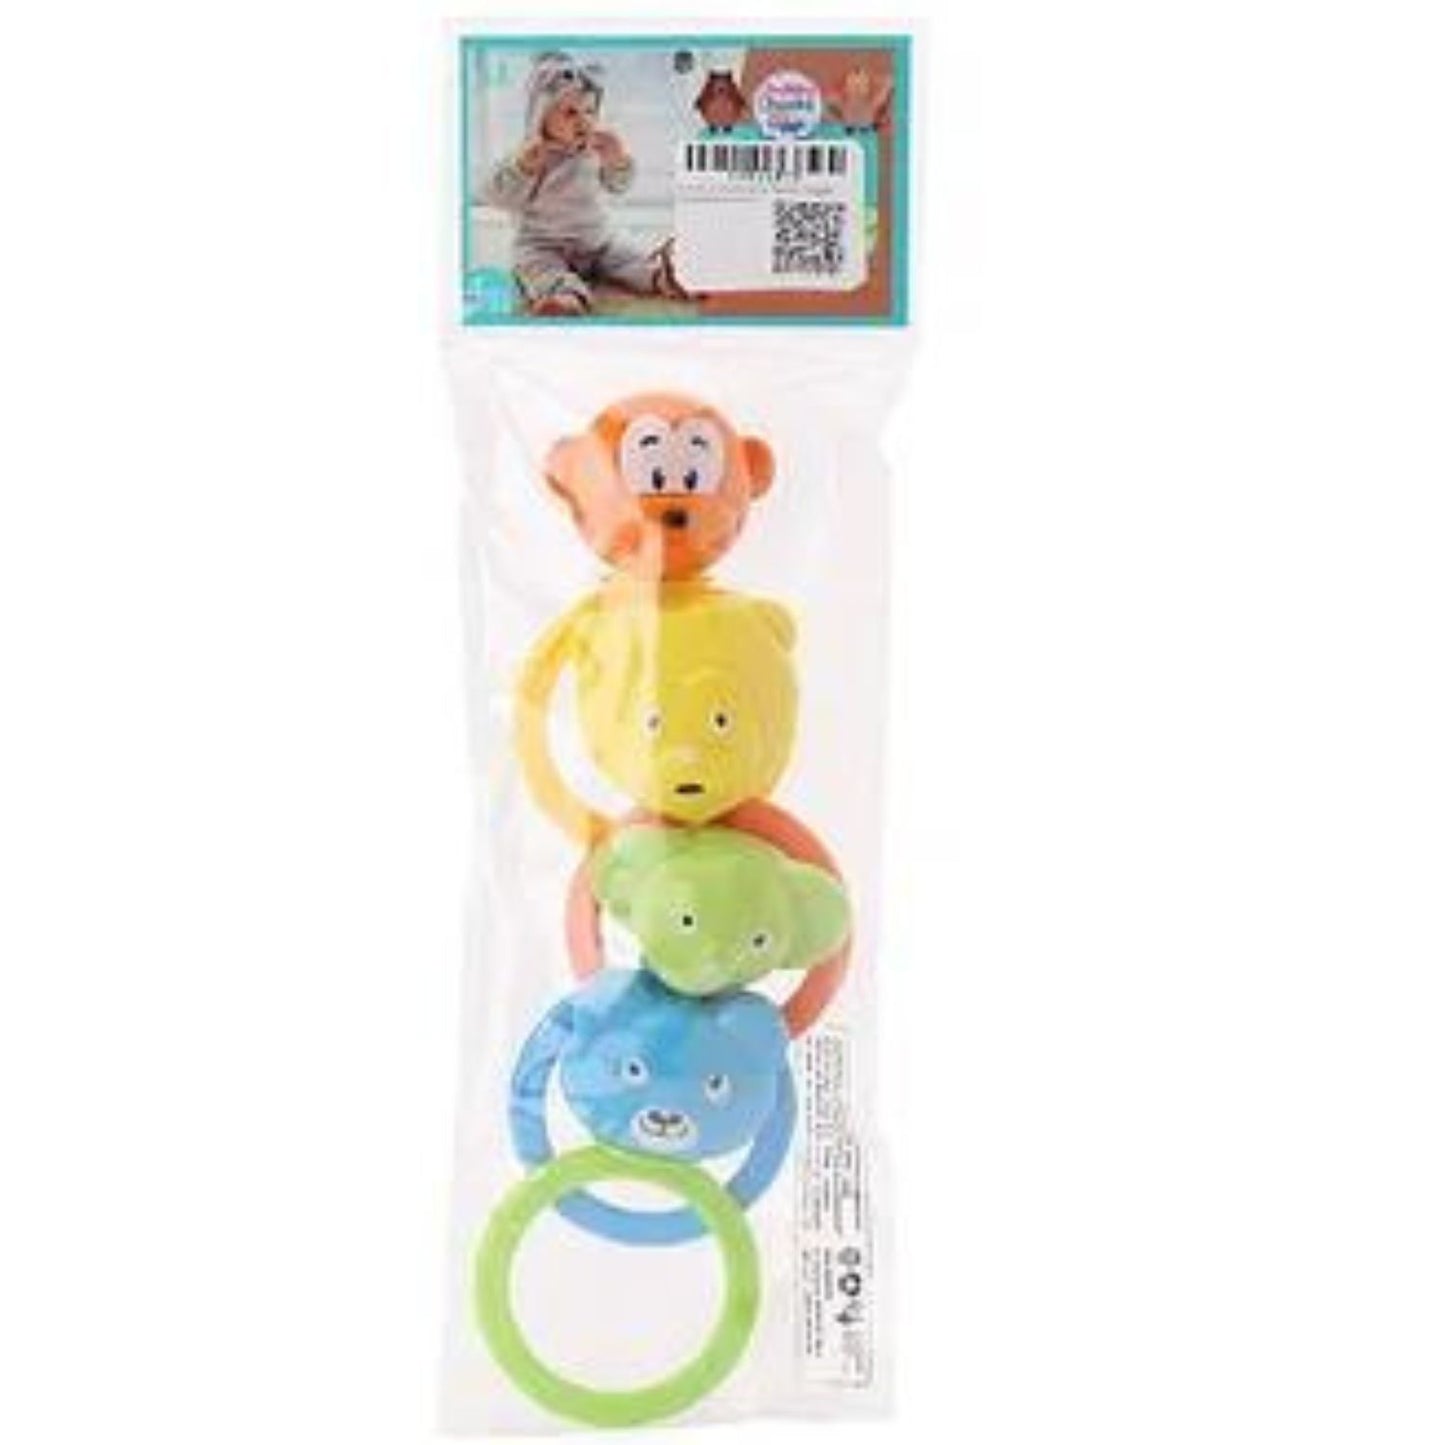 Pack of 4 Rattle Set for New Born Babies - Toy for Babies, Non-Toxic